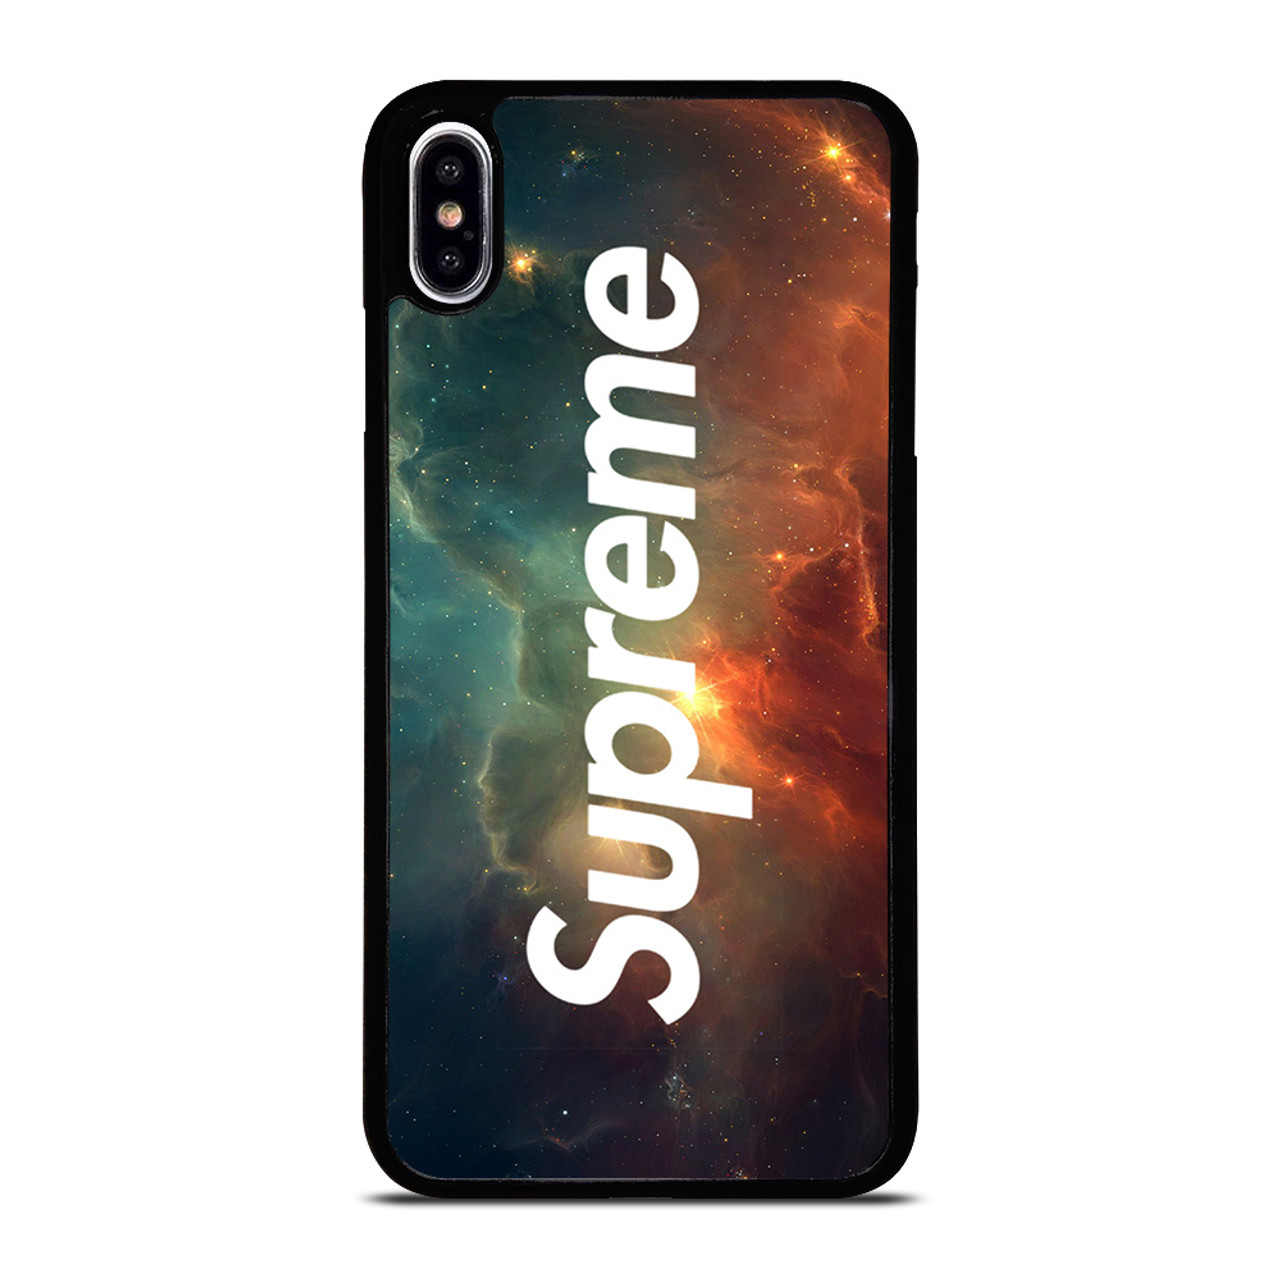 SUPREME SPACE ART 2 iPhone XS Max Case Cover